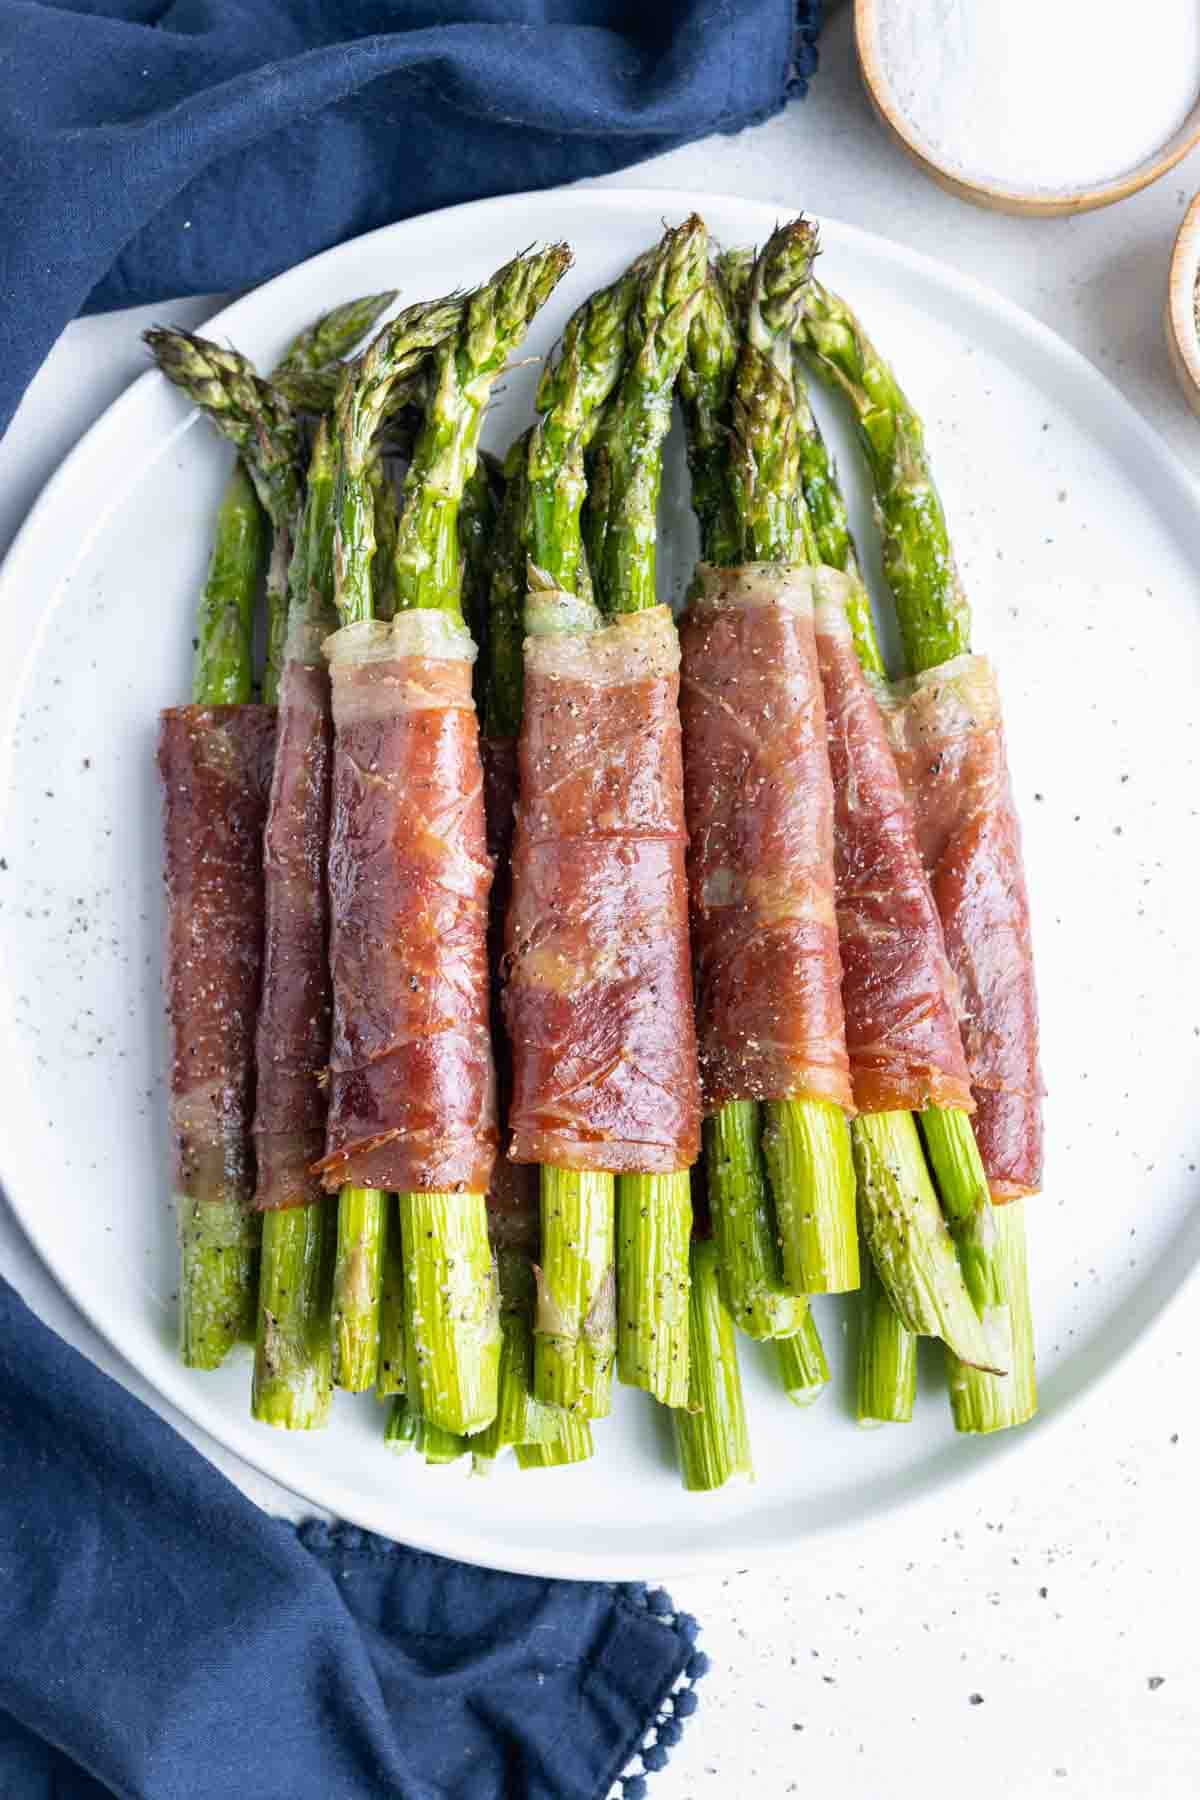 Asparagus baked in the oven and wrapped in prosciutto is served on the counter.